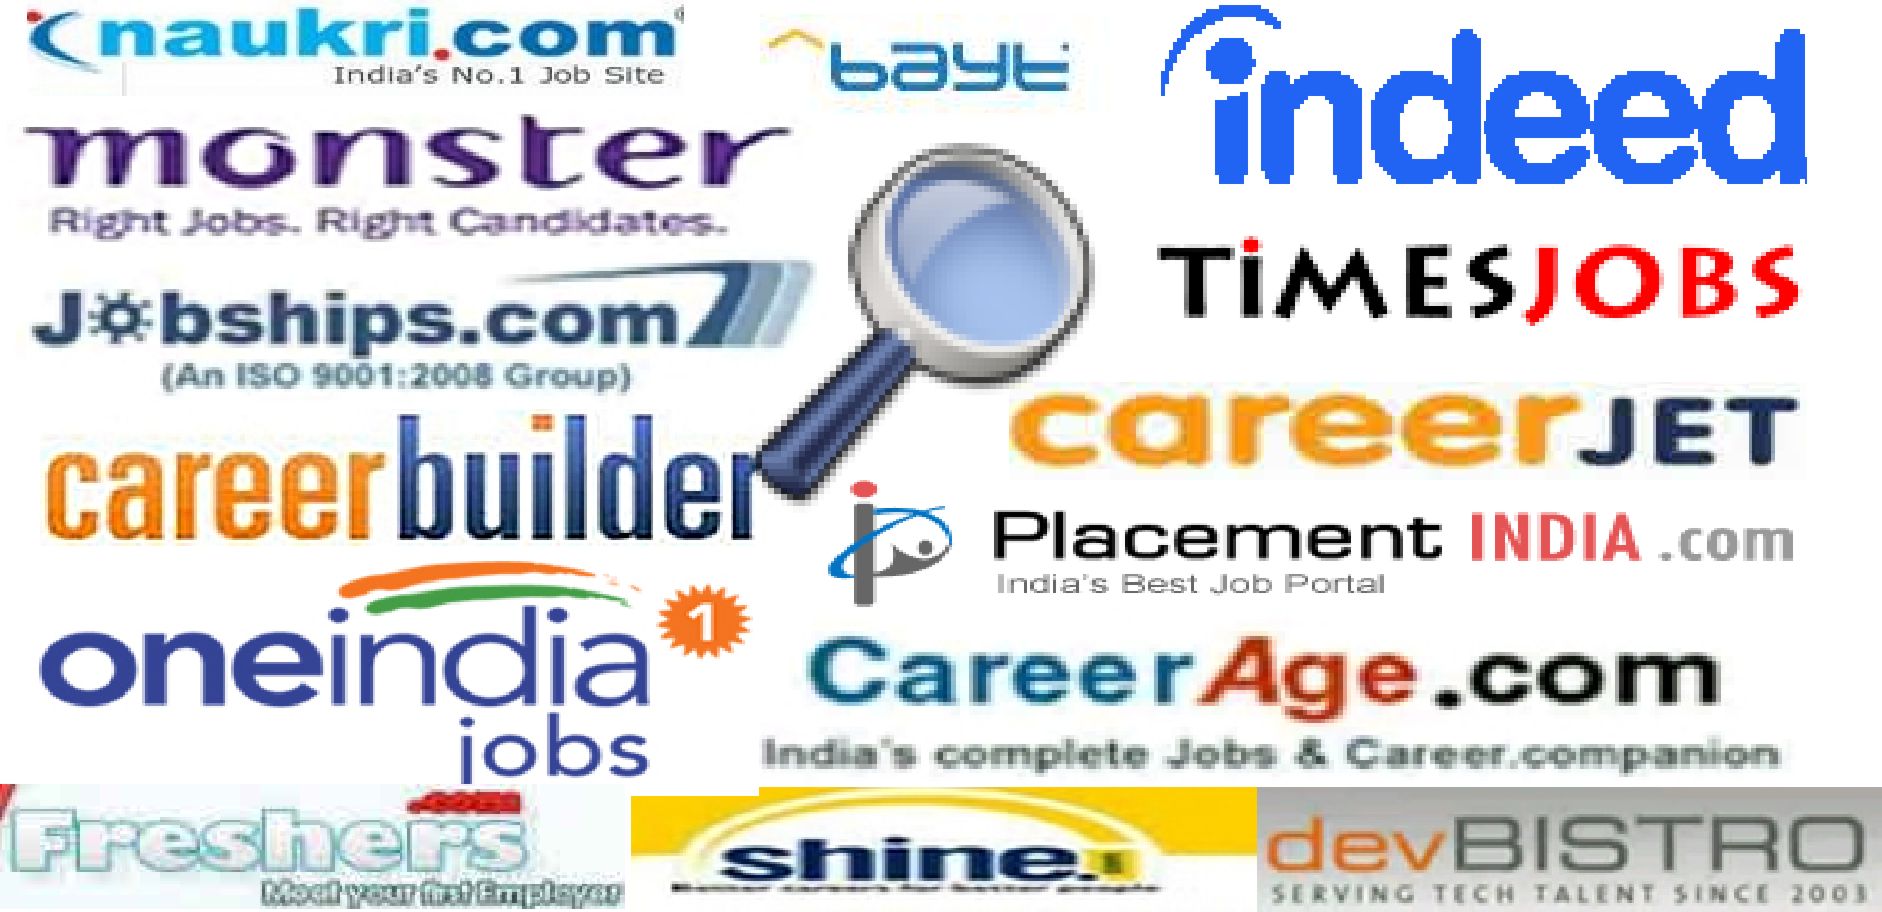 Job opportunity search engines